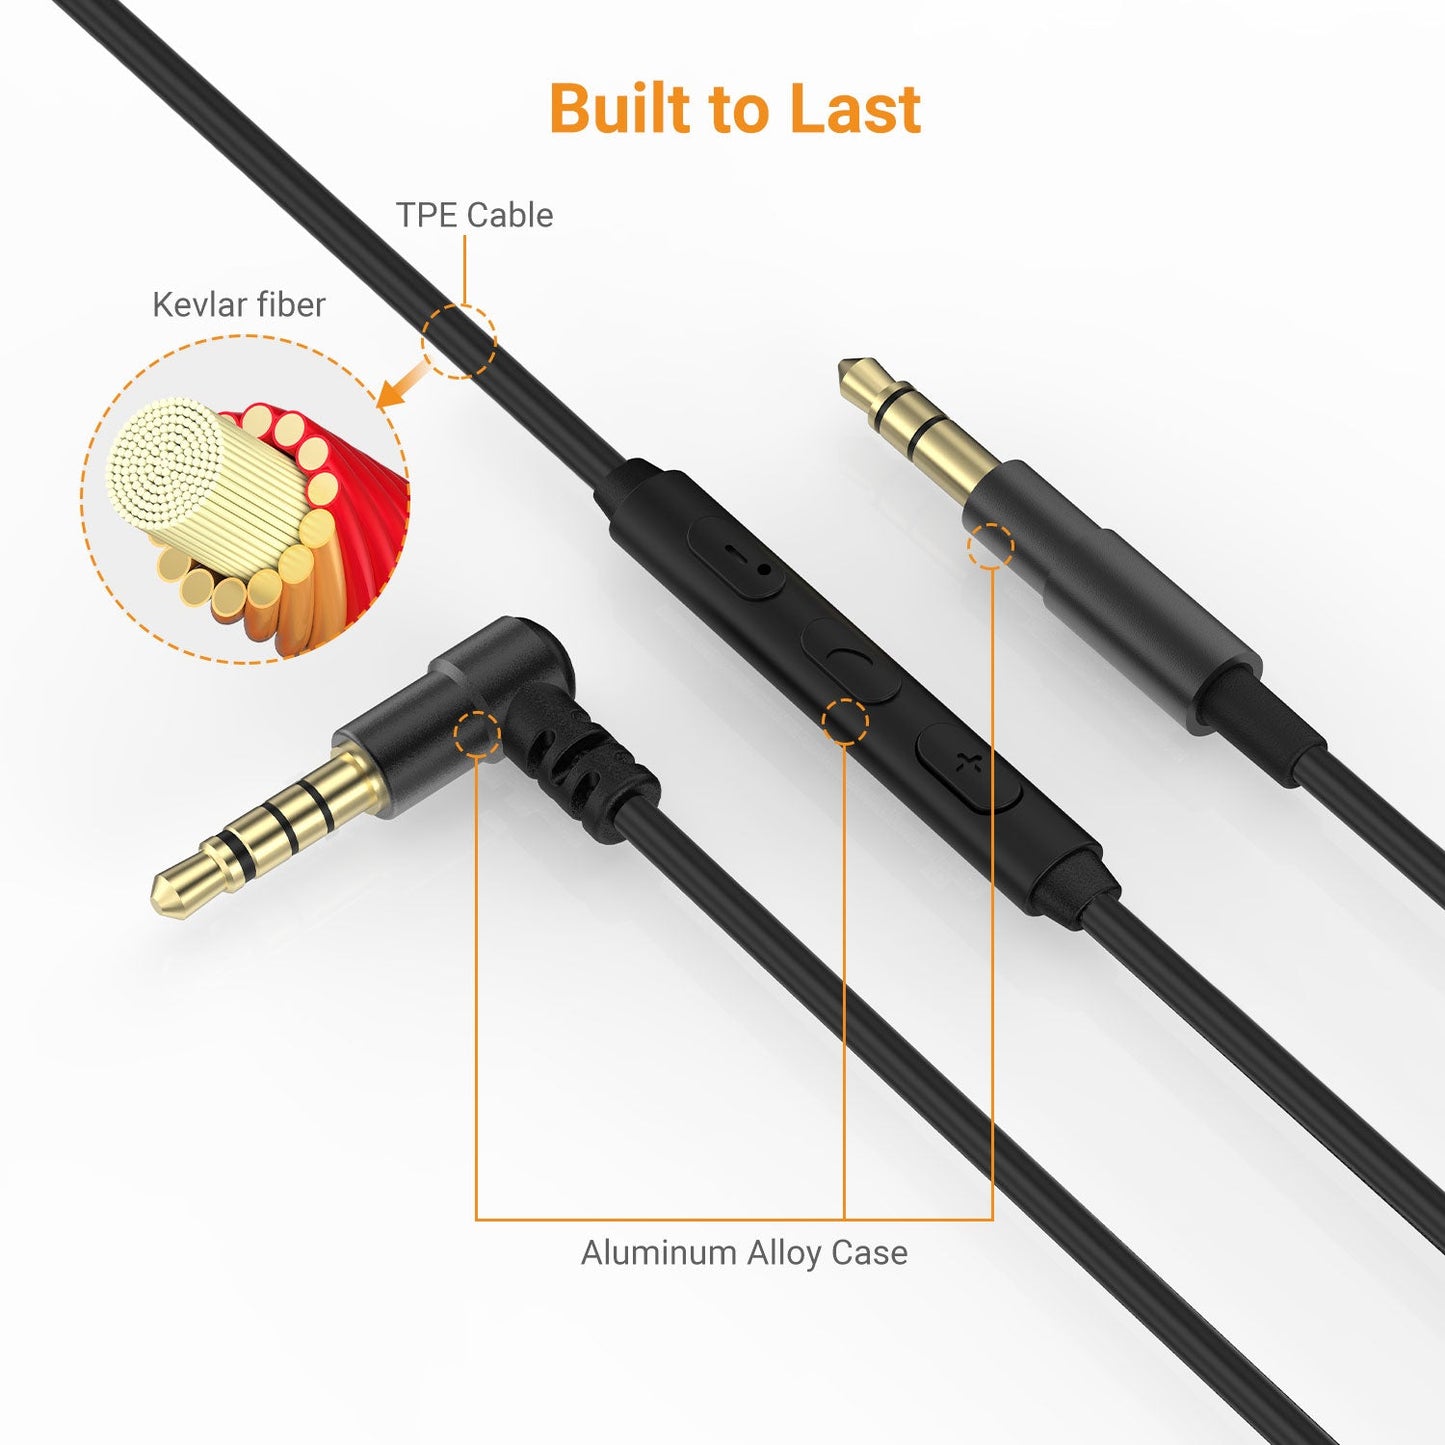 Right-Angled 3.5mm to 3.5mm Headphone Replacement Cable-Black,4FT